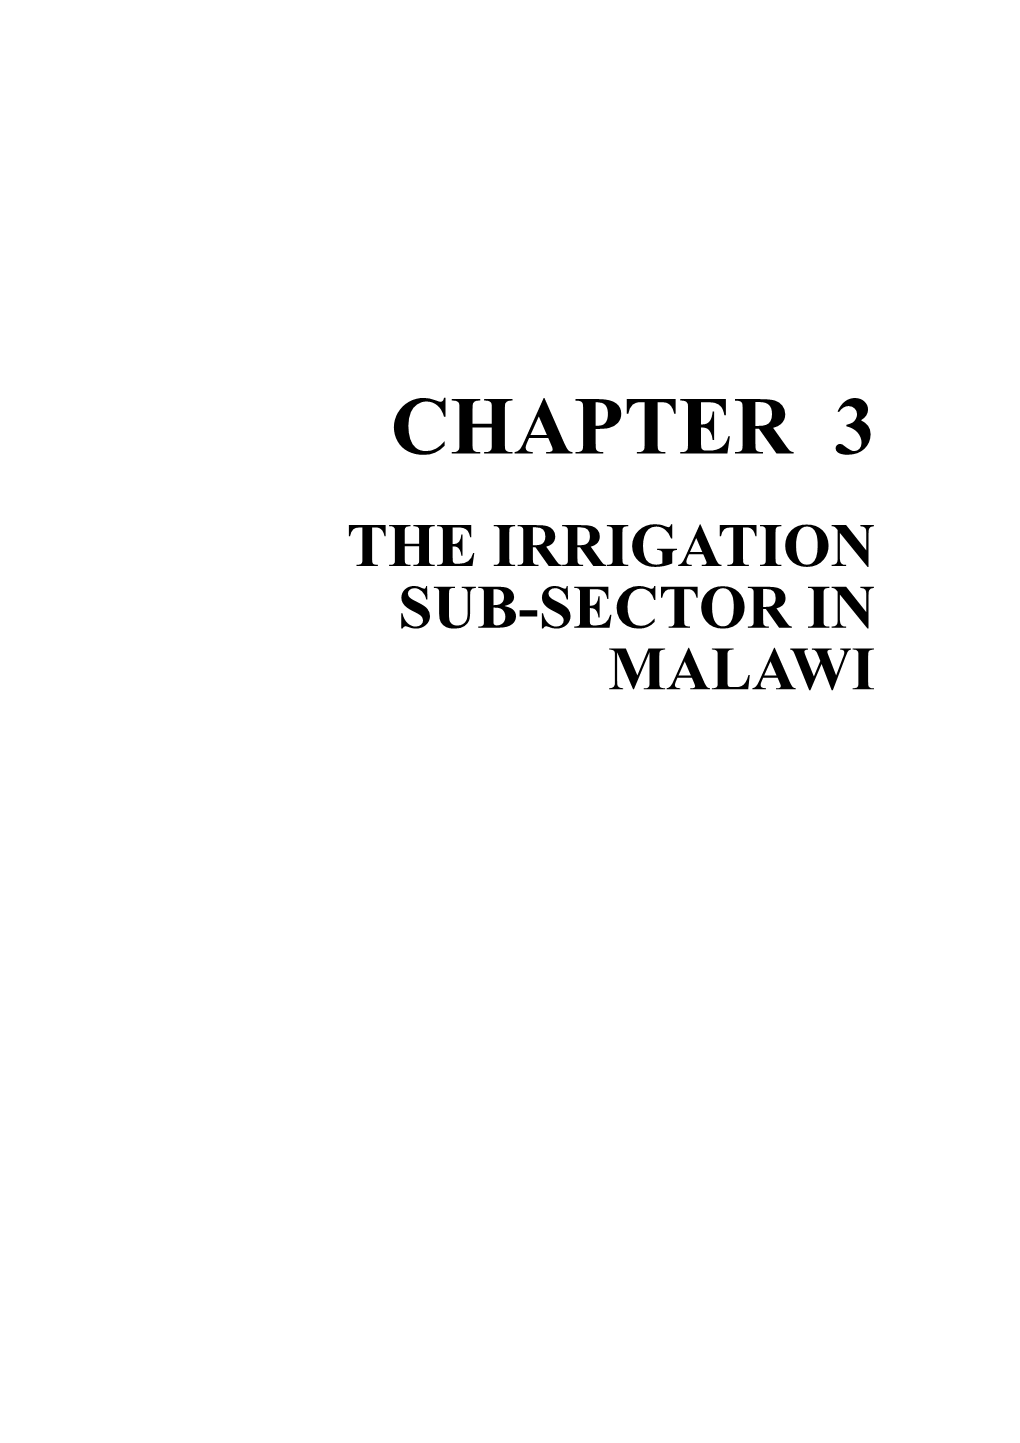 The Irrigation Sub-Sector in Malawi